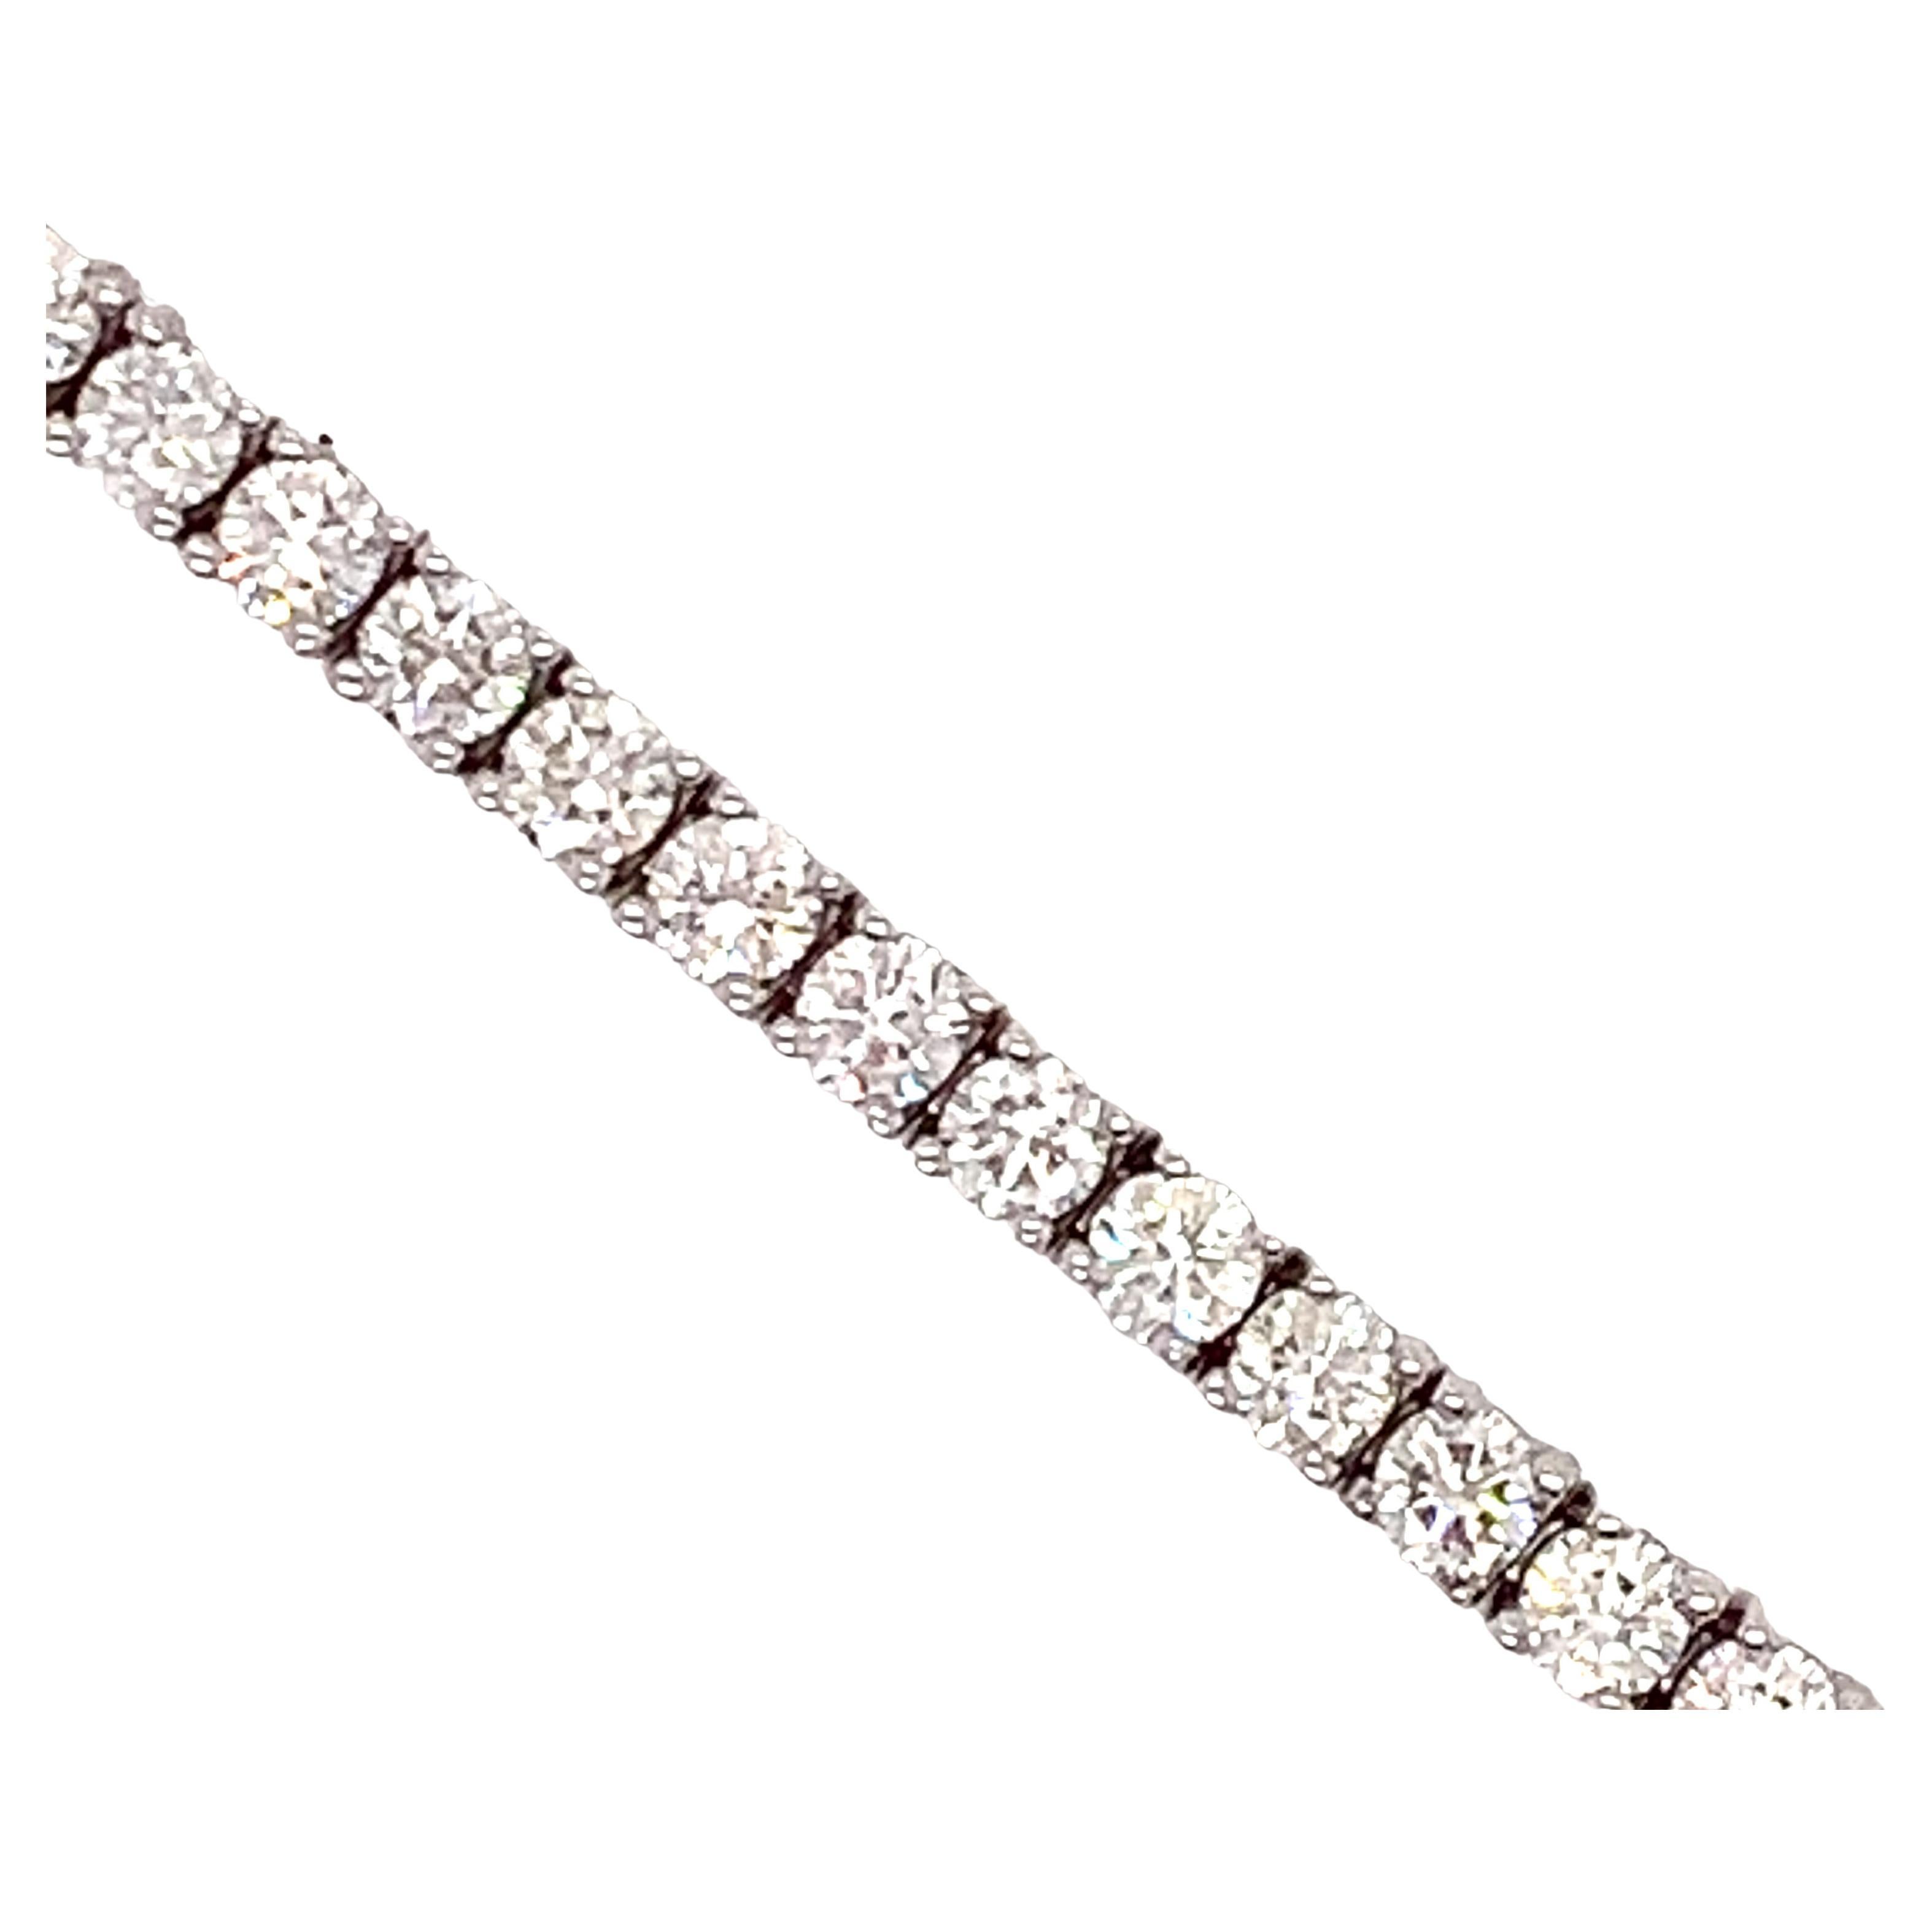 Whether it's your first diamond tennis bracelet or you collect them, this classic beauty is 5.10 cttw in round diamonds. There are 62 diamonds. These are SI clarity with a G-H color. The diamonds are mounted in 9.79 grams of 14 kt white gold in a